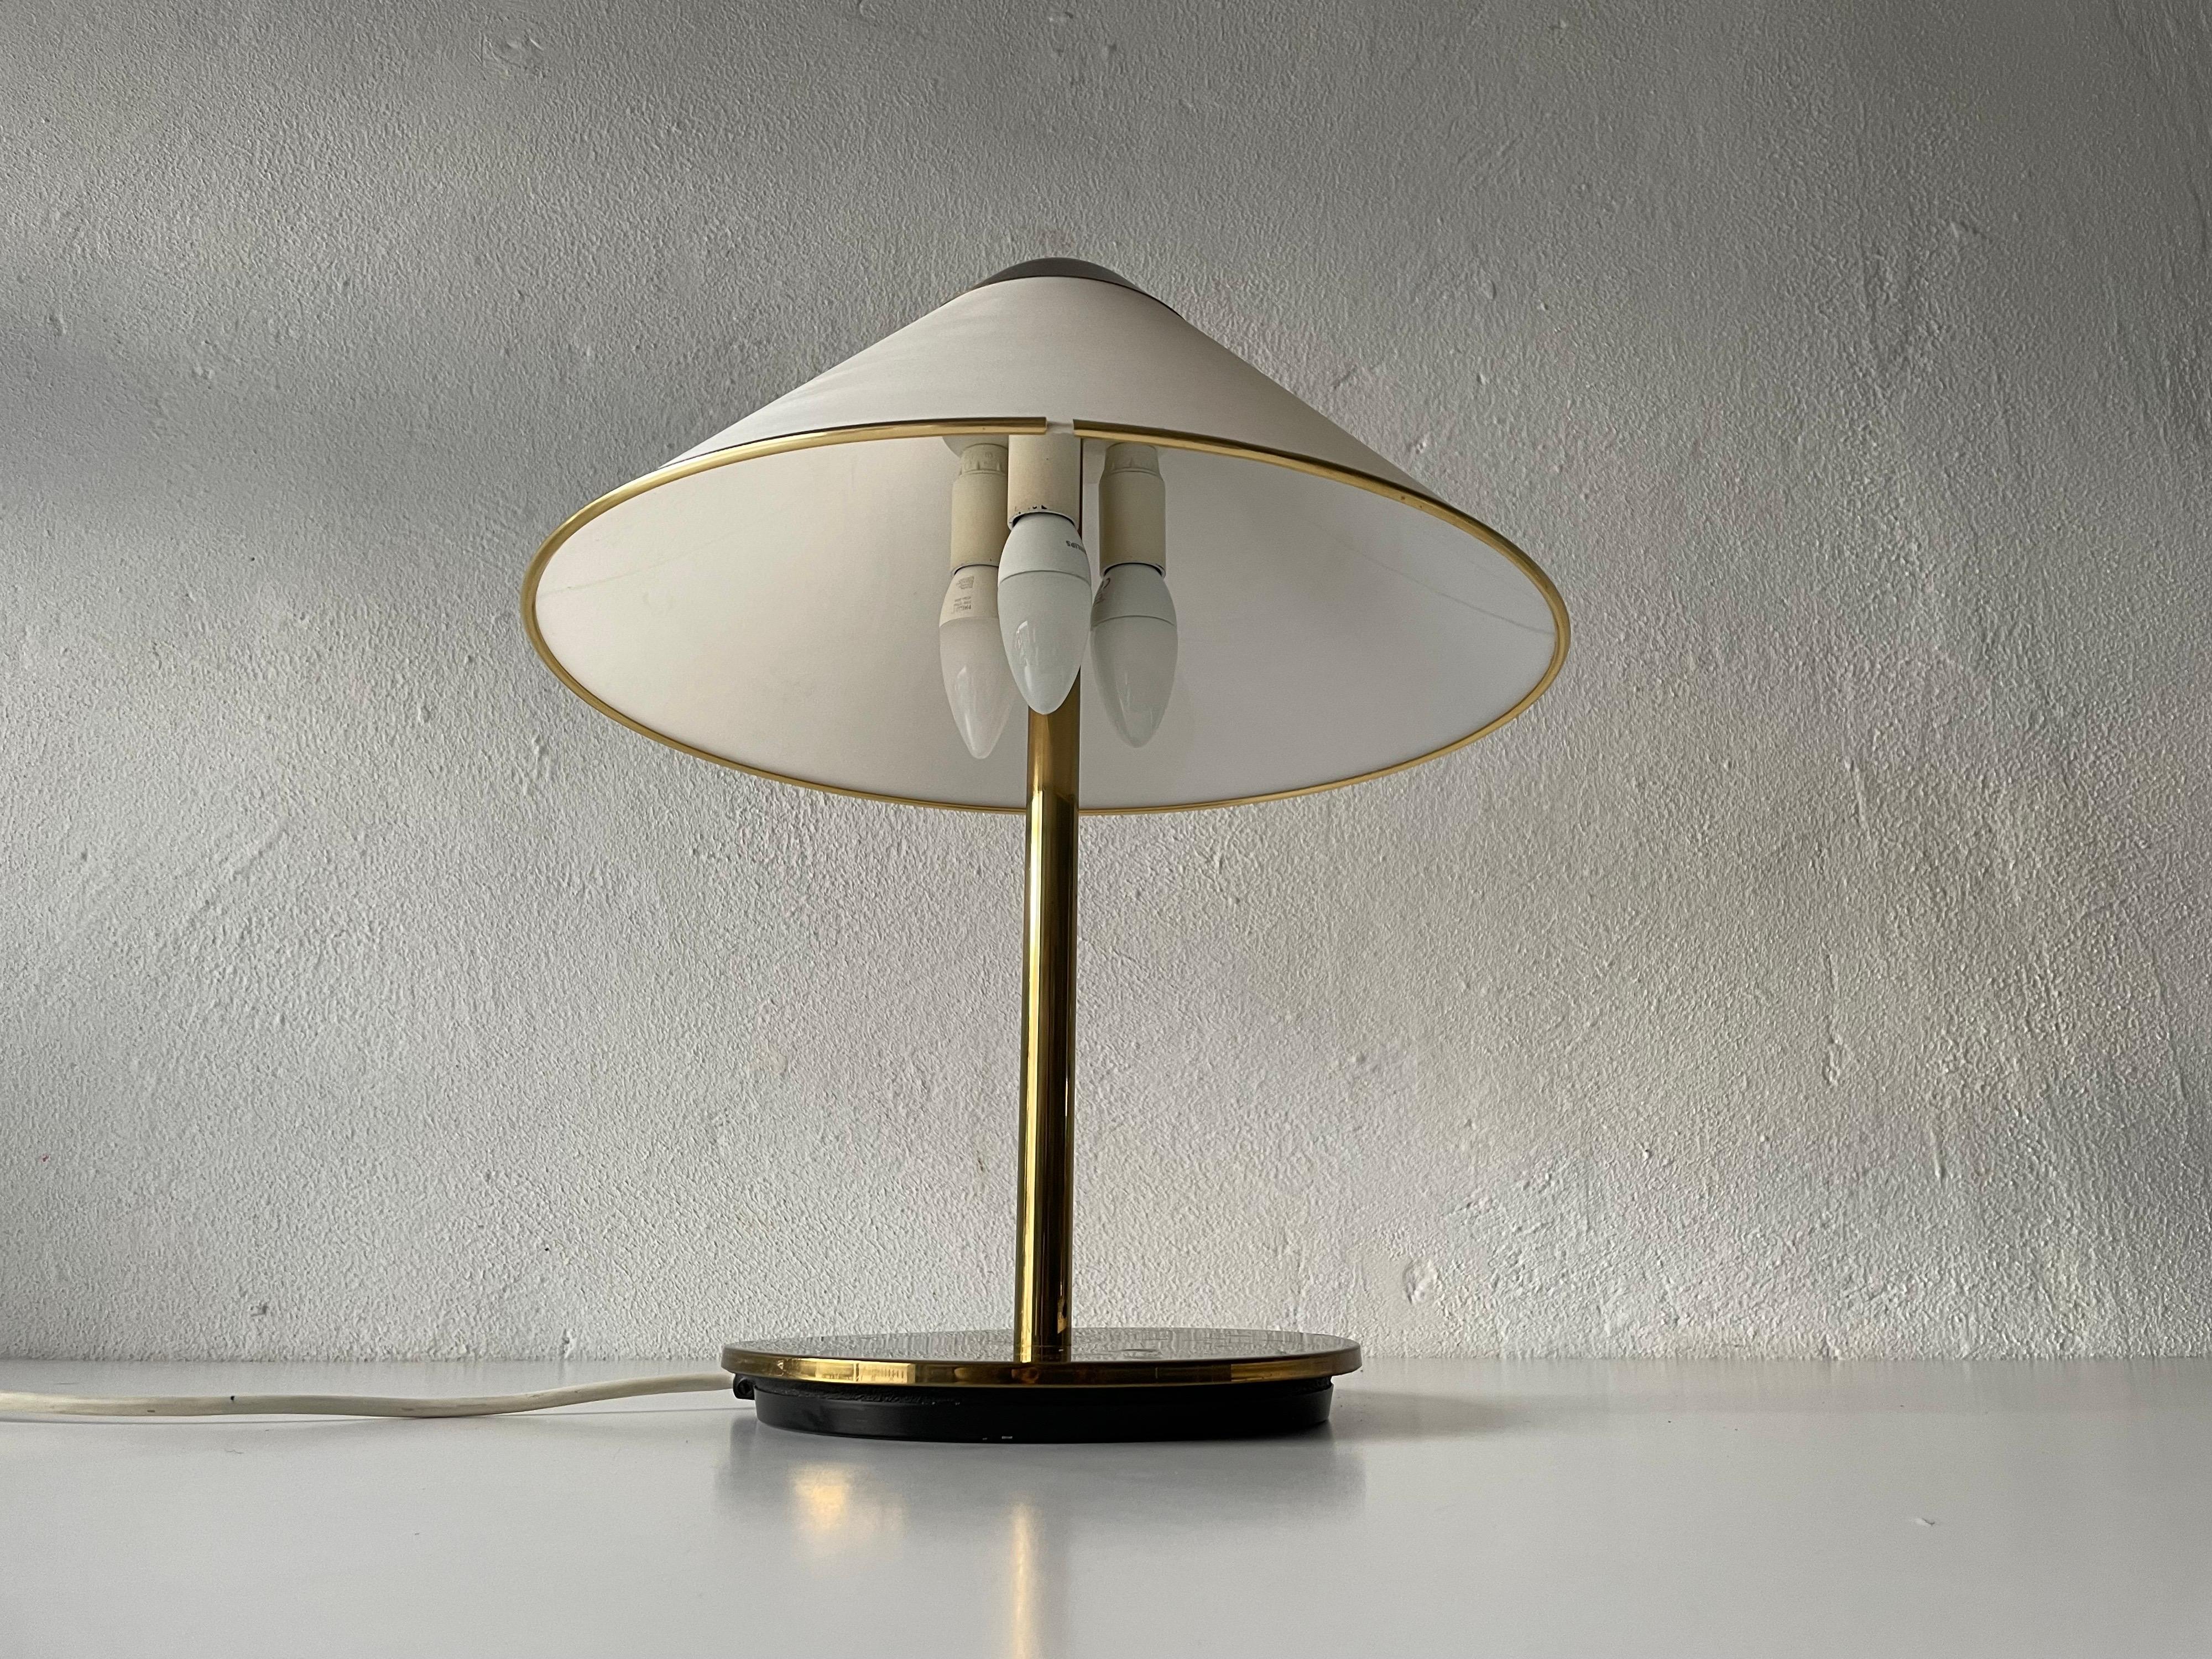 Space Age Mid-Century Modern Plexiglass and Brass Luxurious Table Lamp, 1950s, Germany